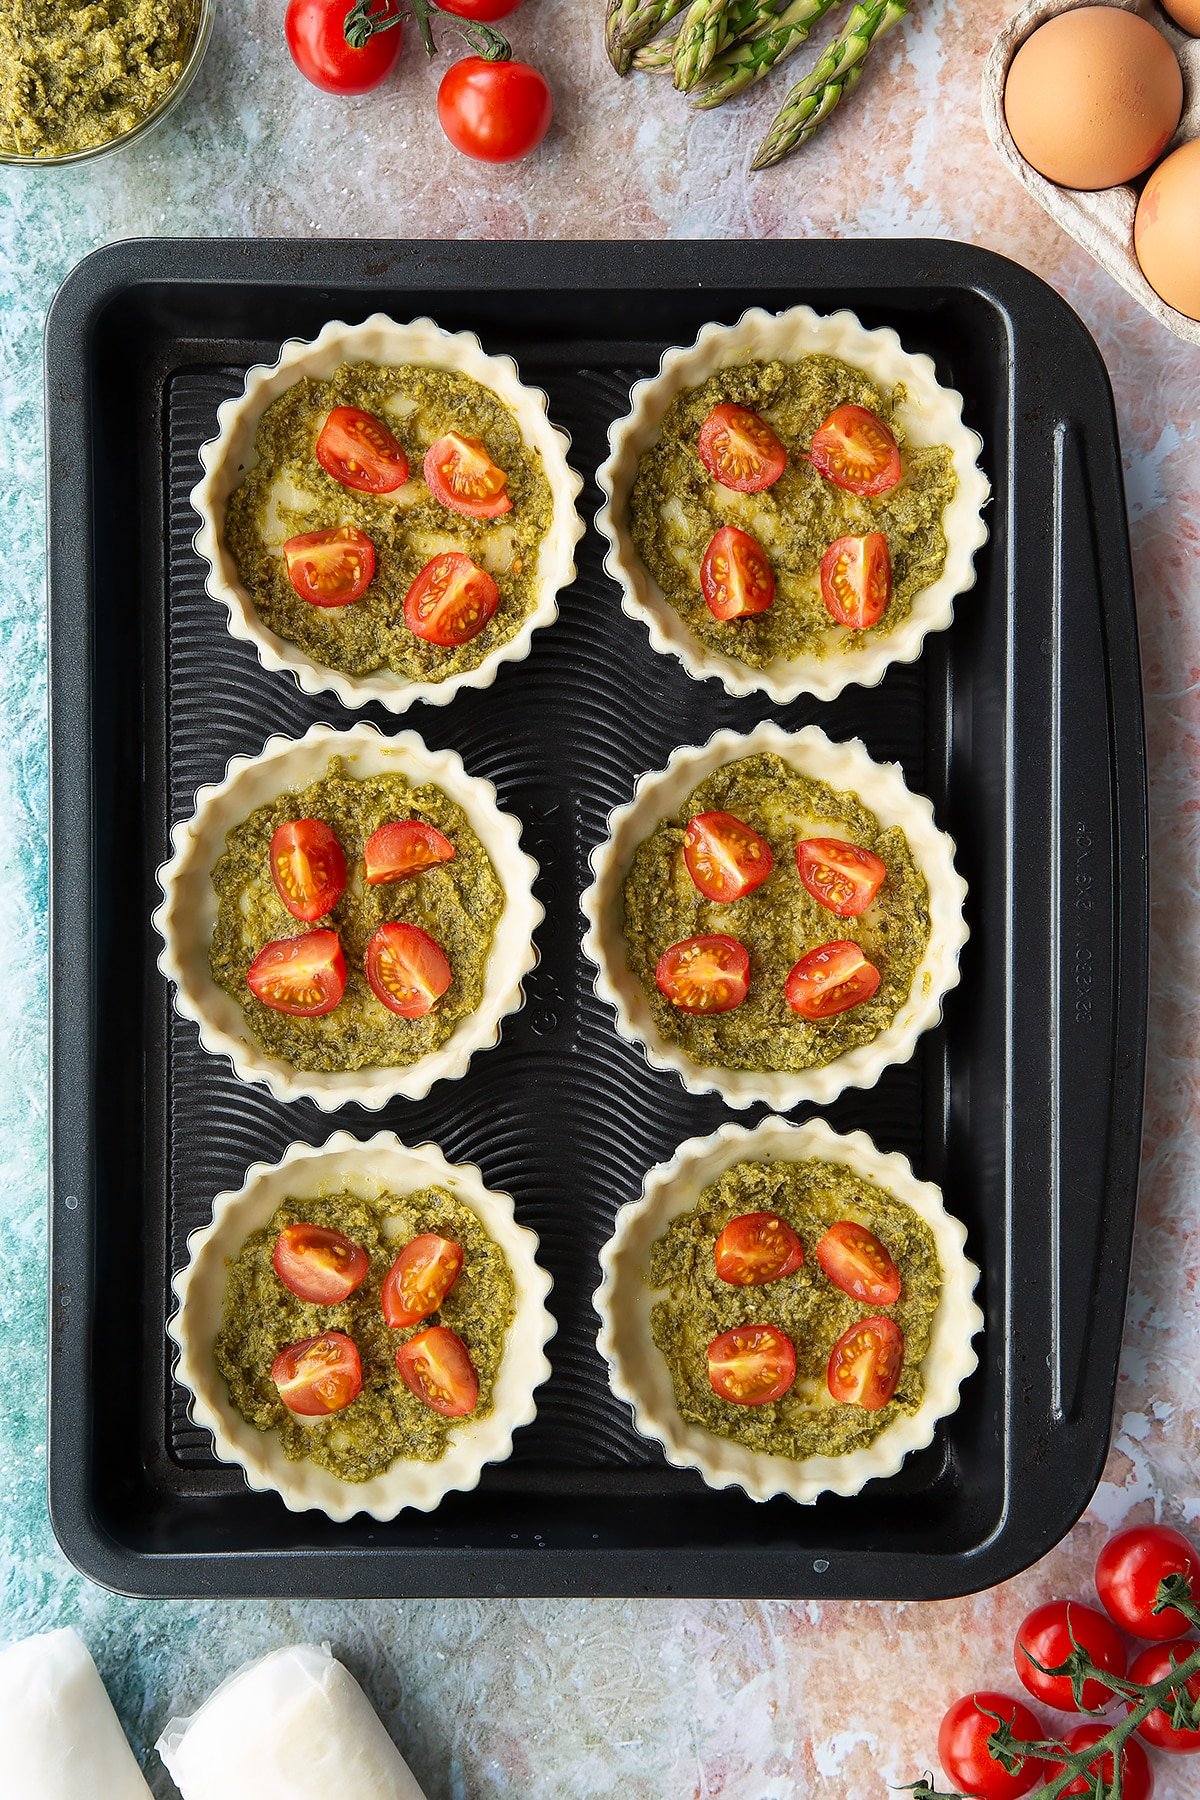 Six tartlet tins on a baking tray. Pastry is fitted and trimmed in the tins. The bottoms are spread with pesto and topped with cherry tomato pieces. Ingredients to make asparagus tartlets surround the tray.